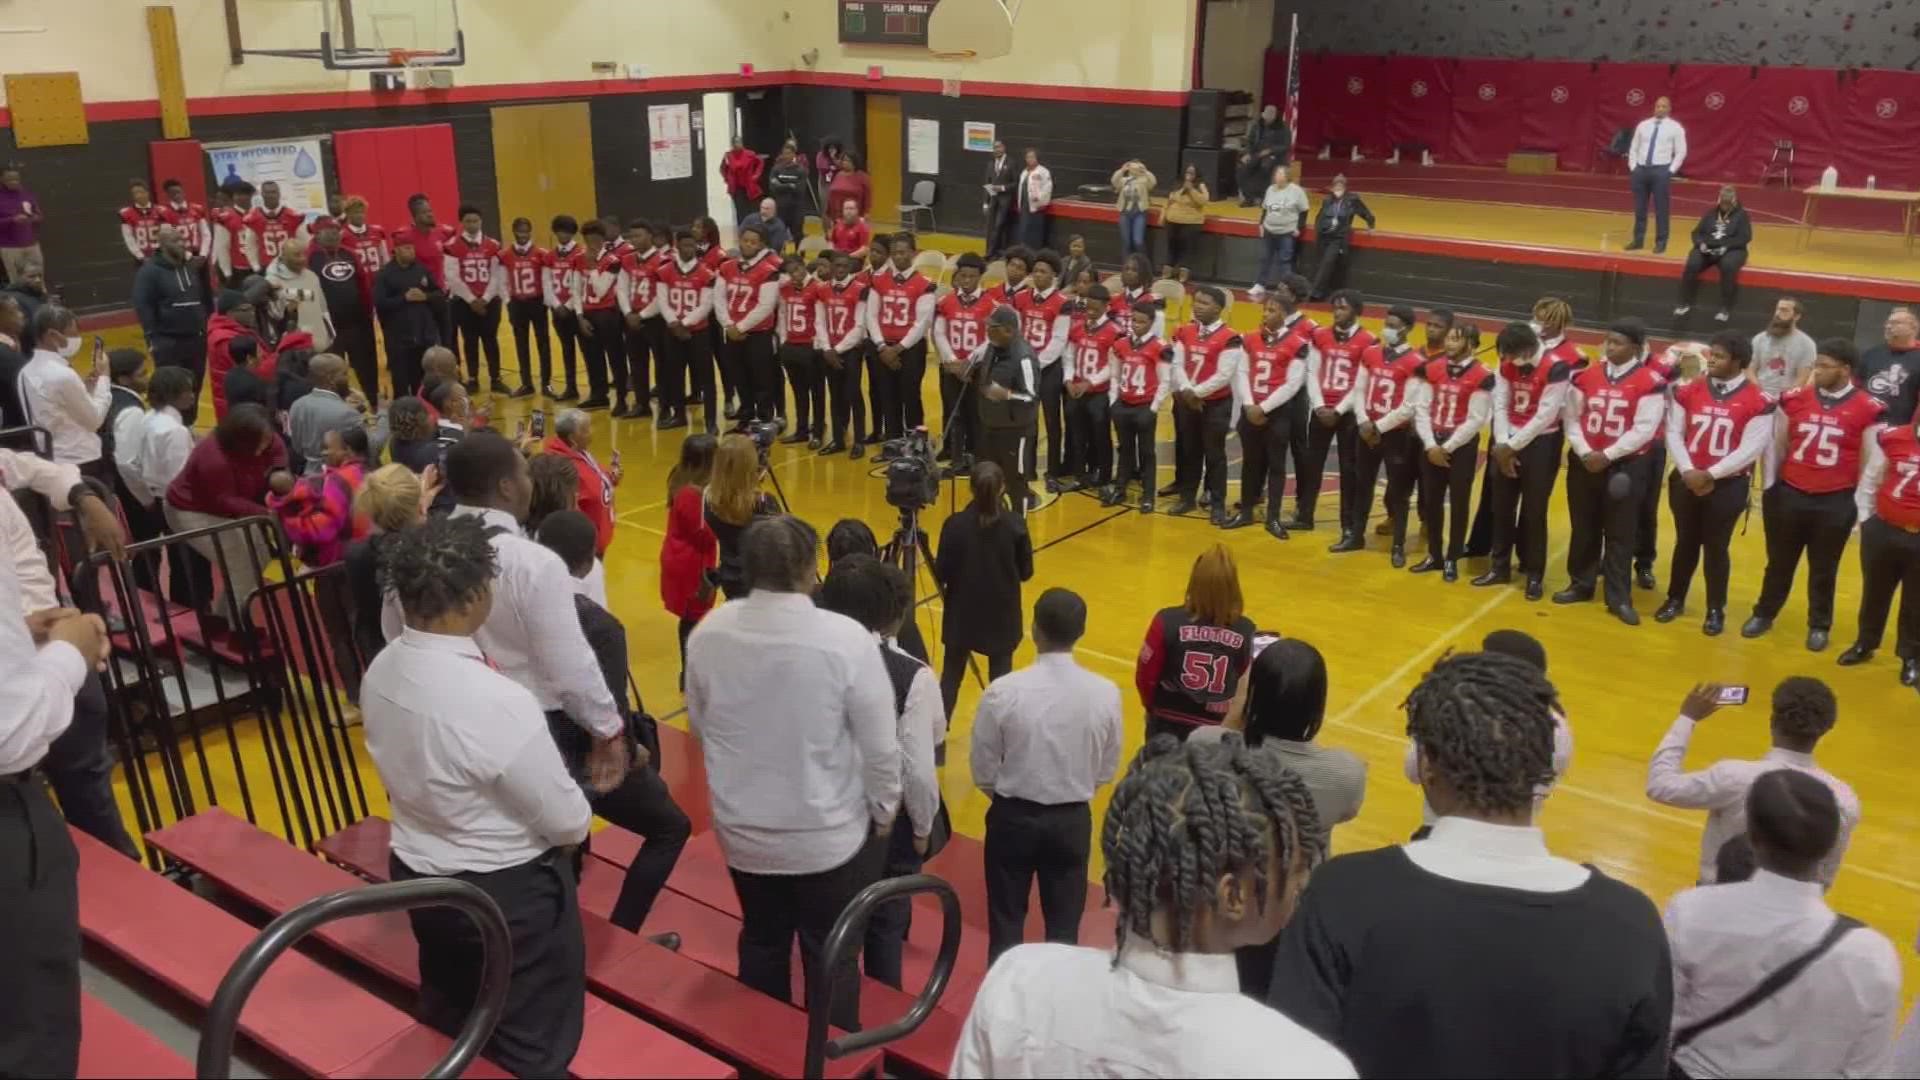 The Tarblooders, who became the first team from CMSD to take home the title, were greeted with applause Monday morning.